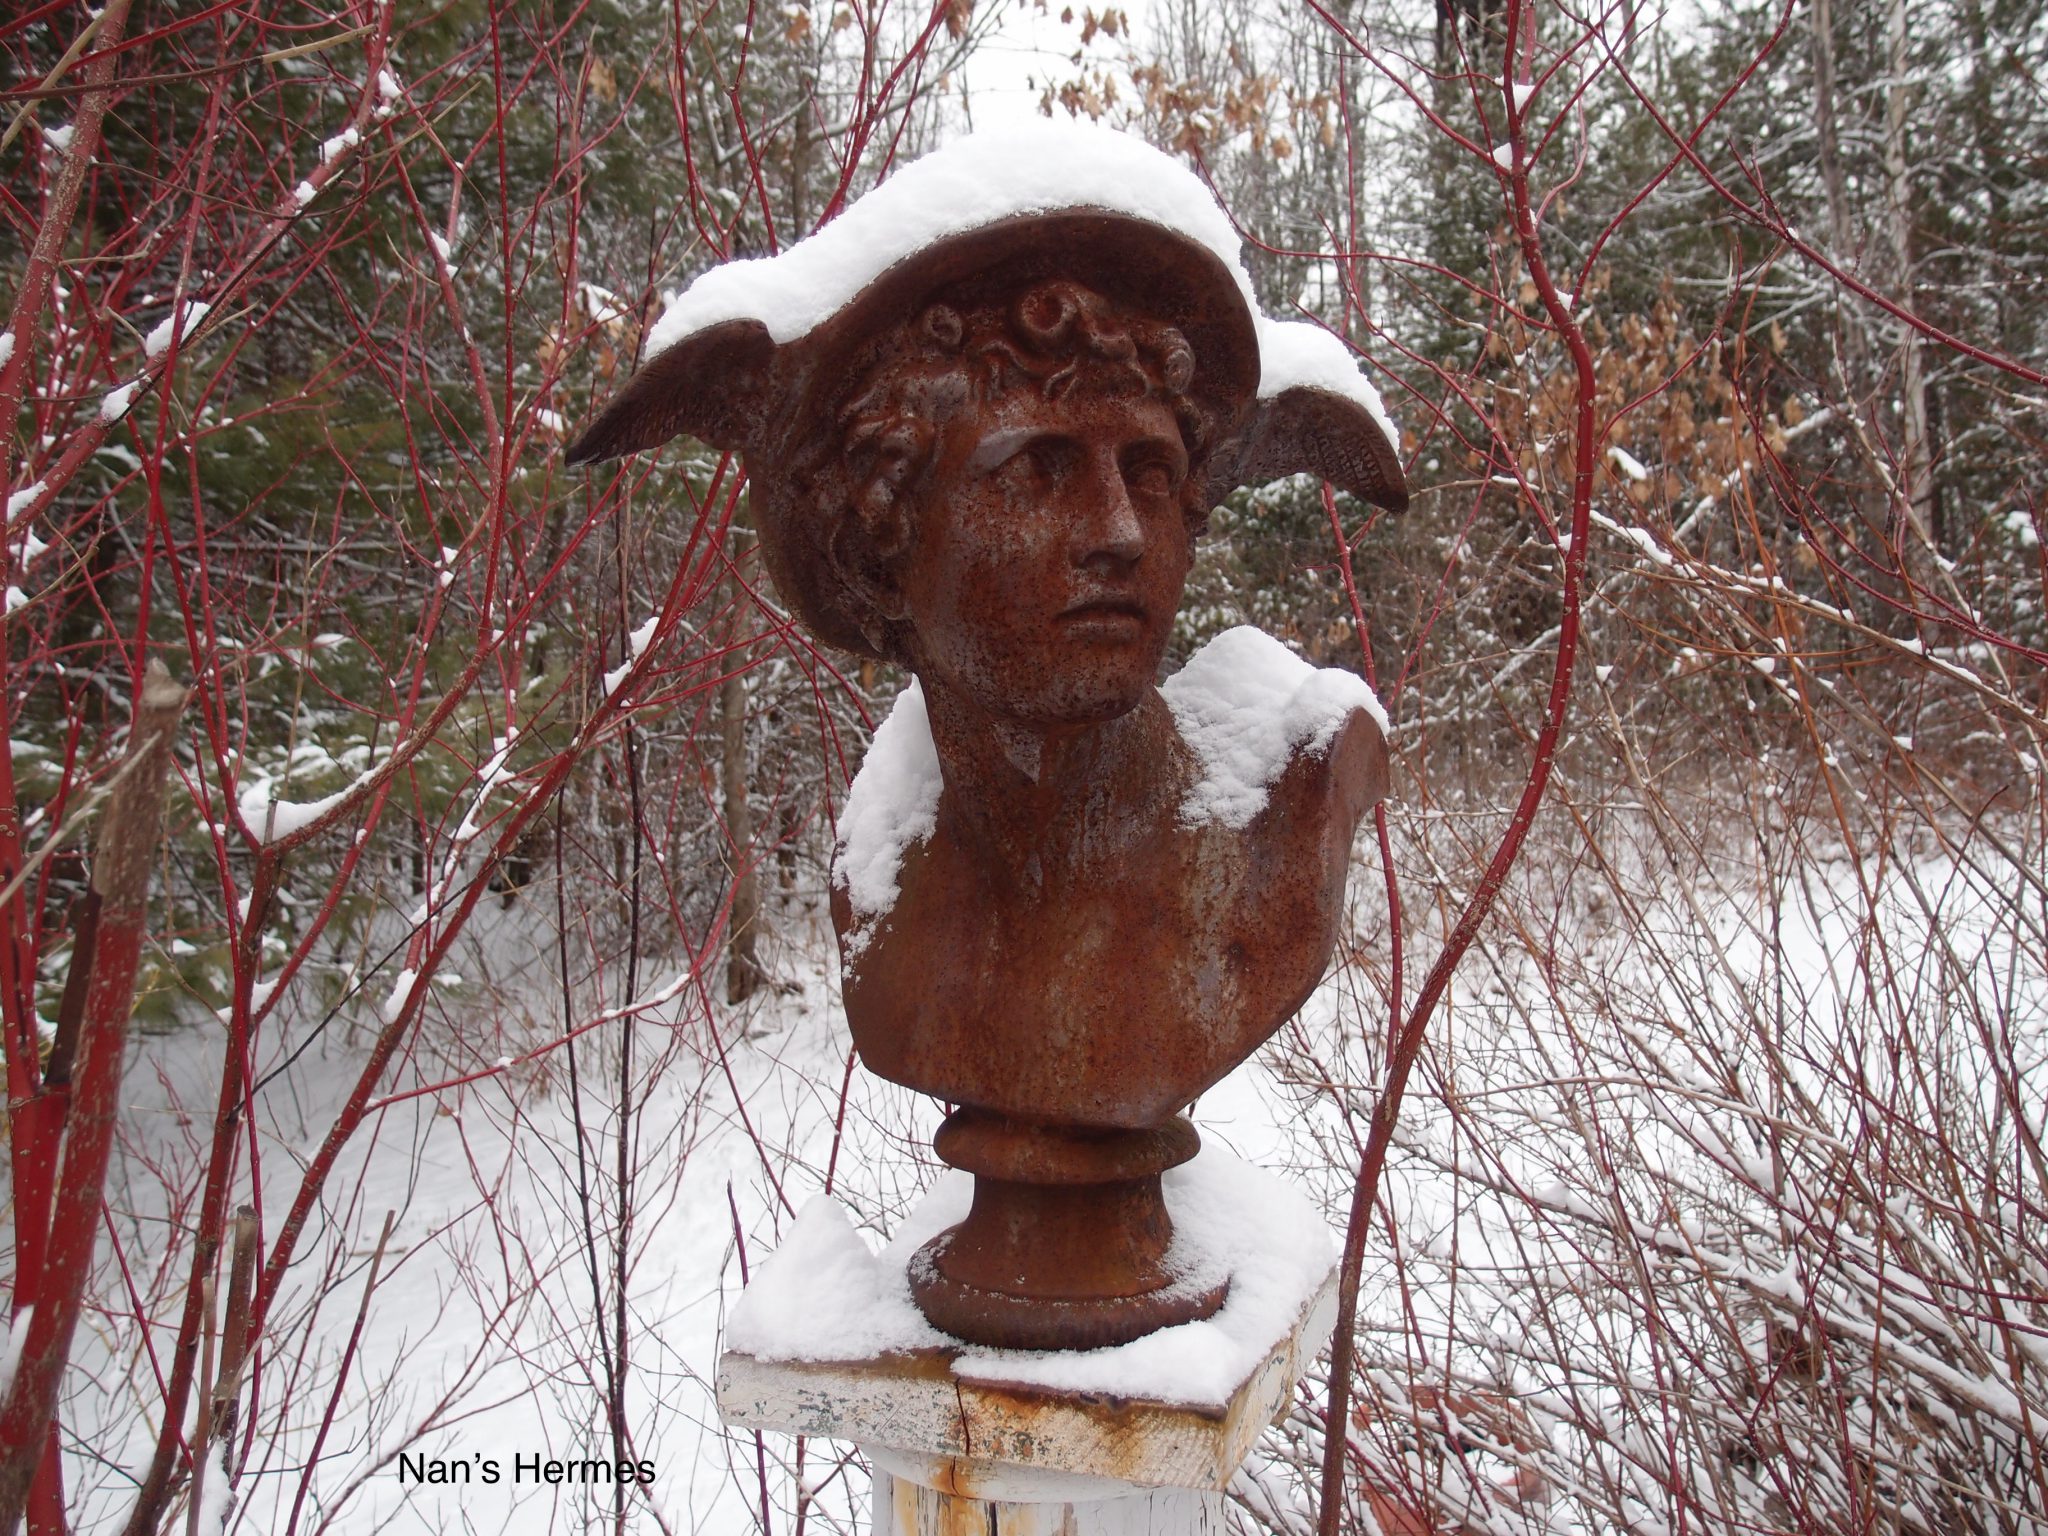 Here's my Hermes...enduring New Hampshire's endless Winter, without complaint.